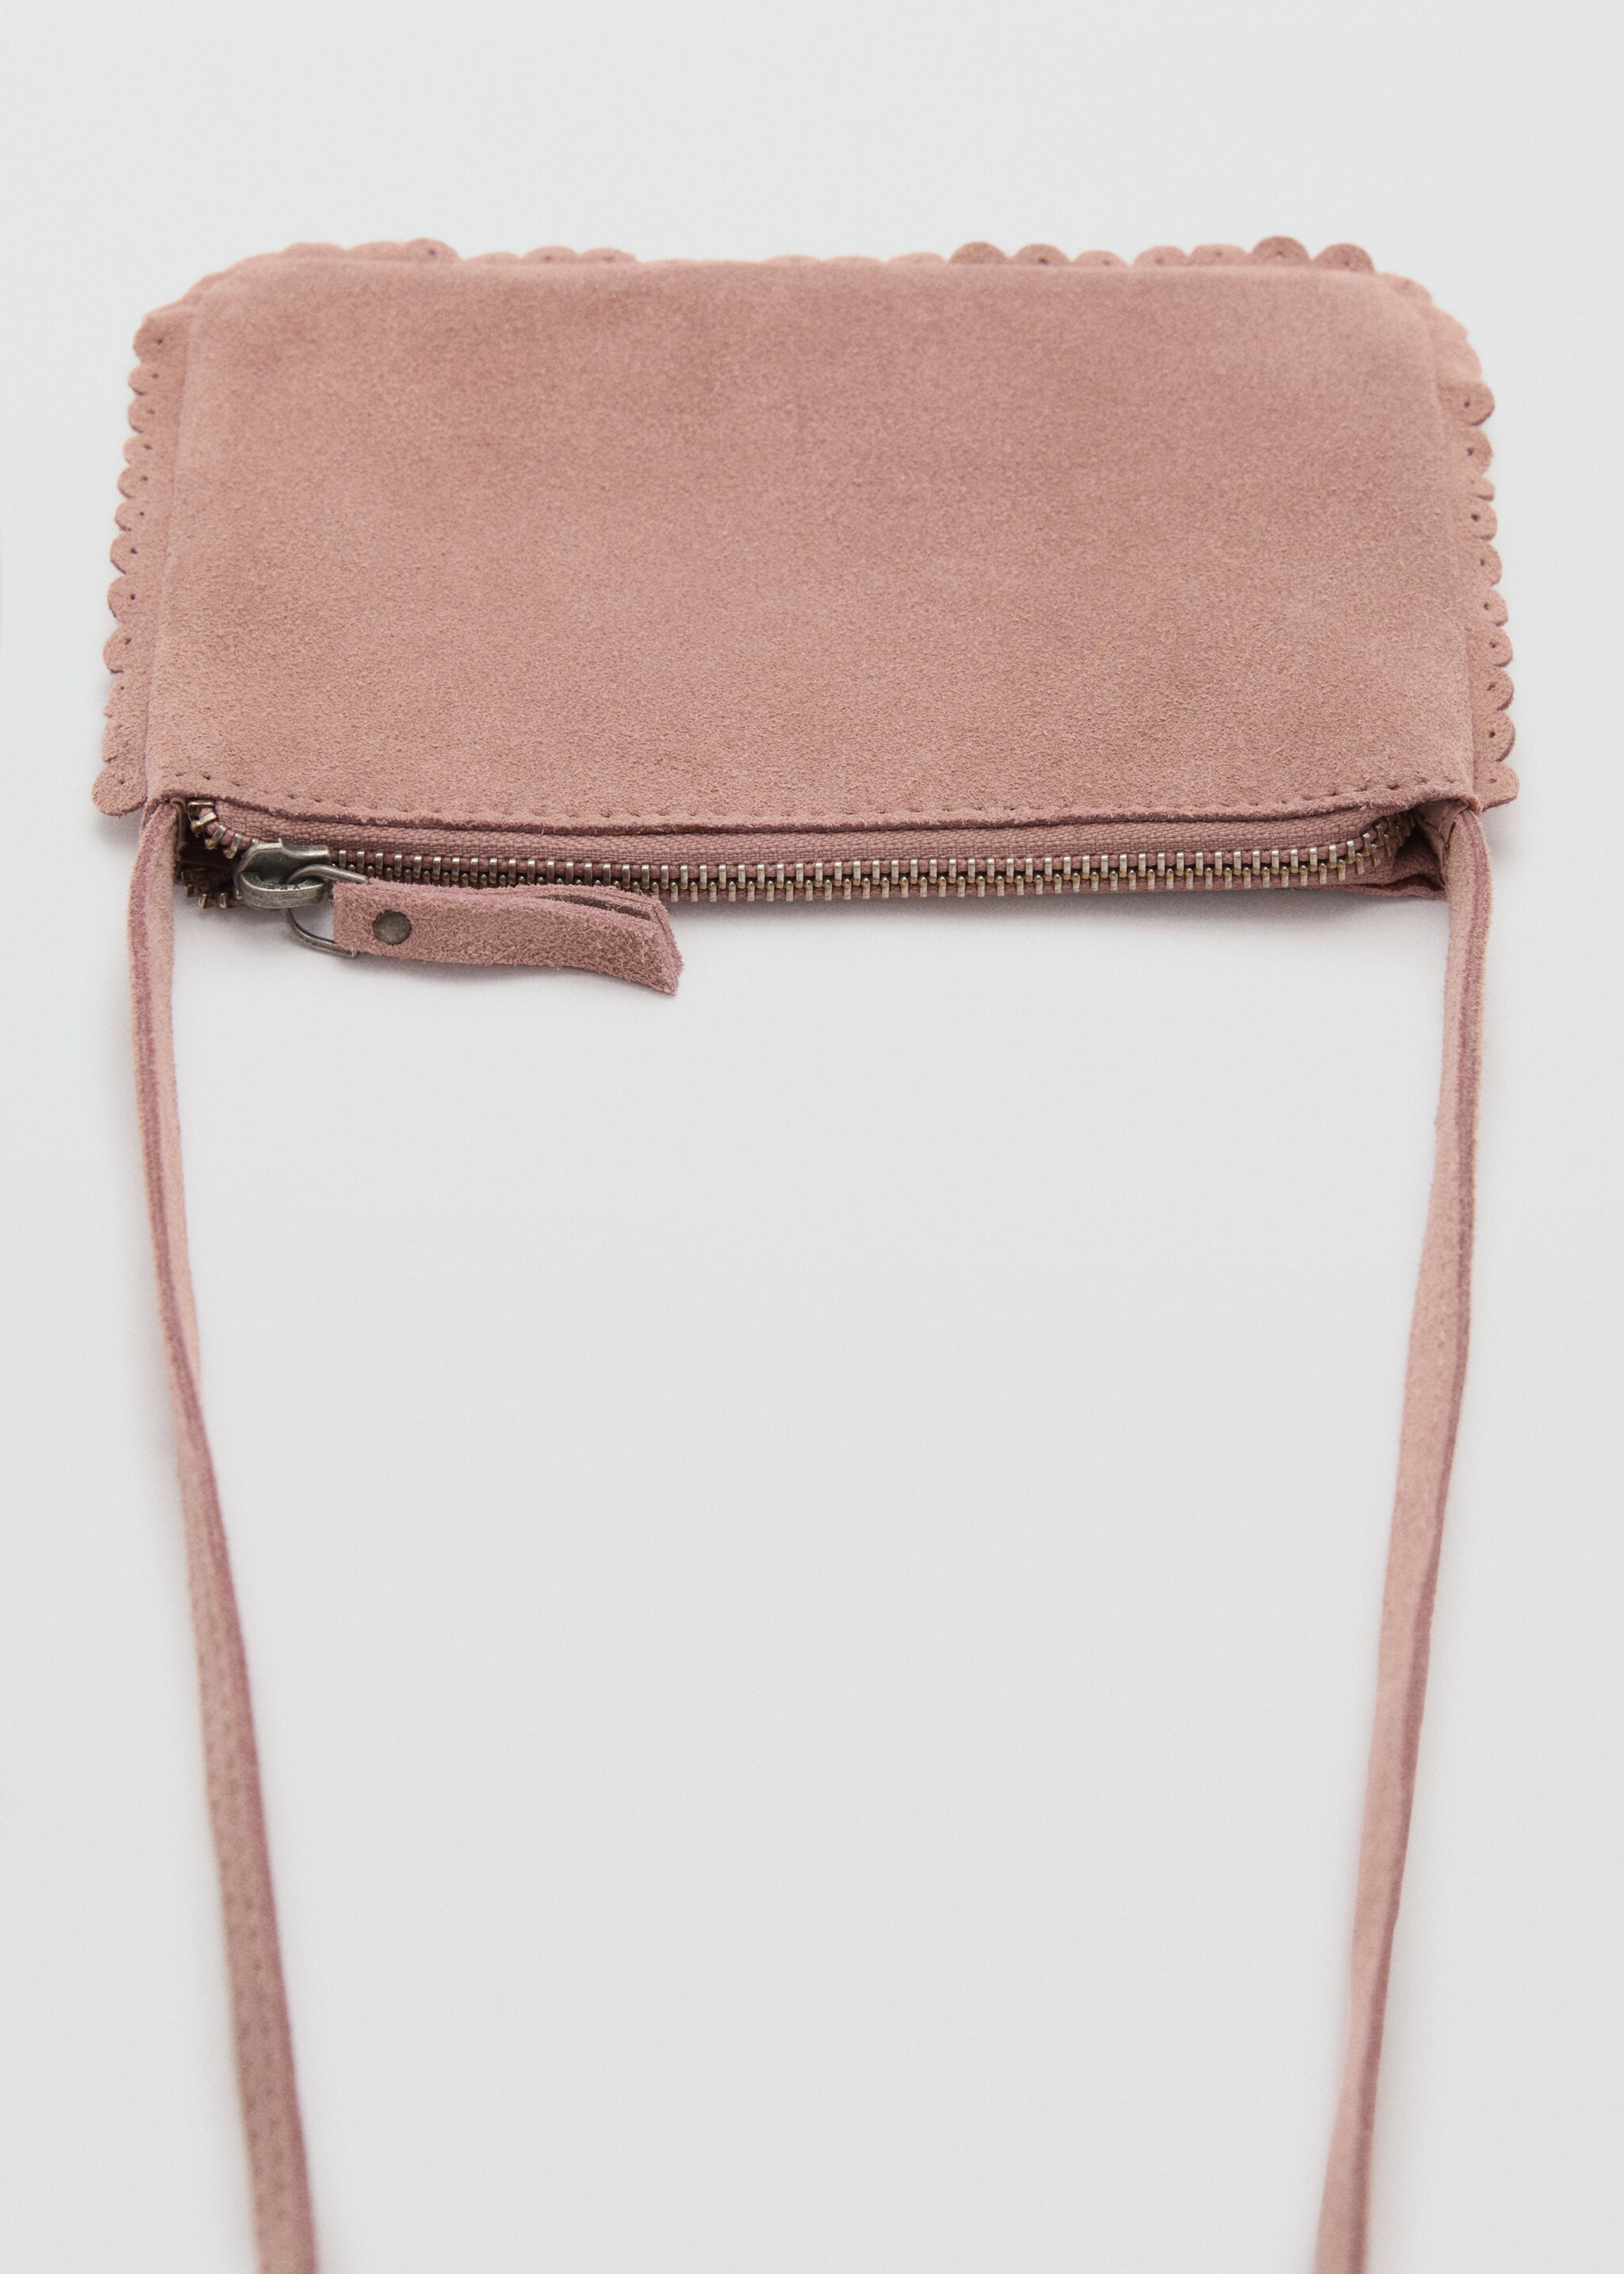 Leather bag - Details of the article 1